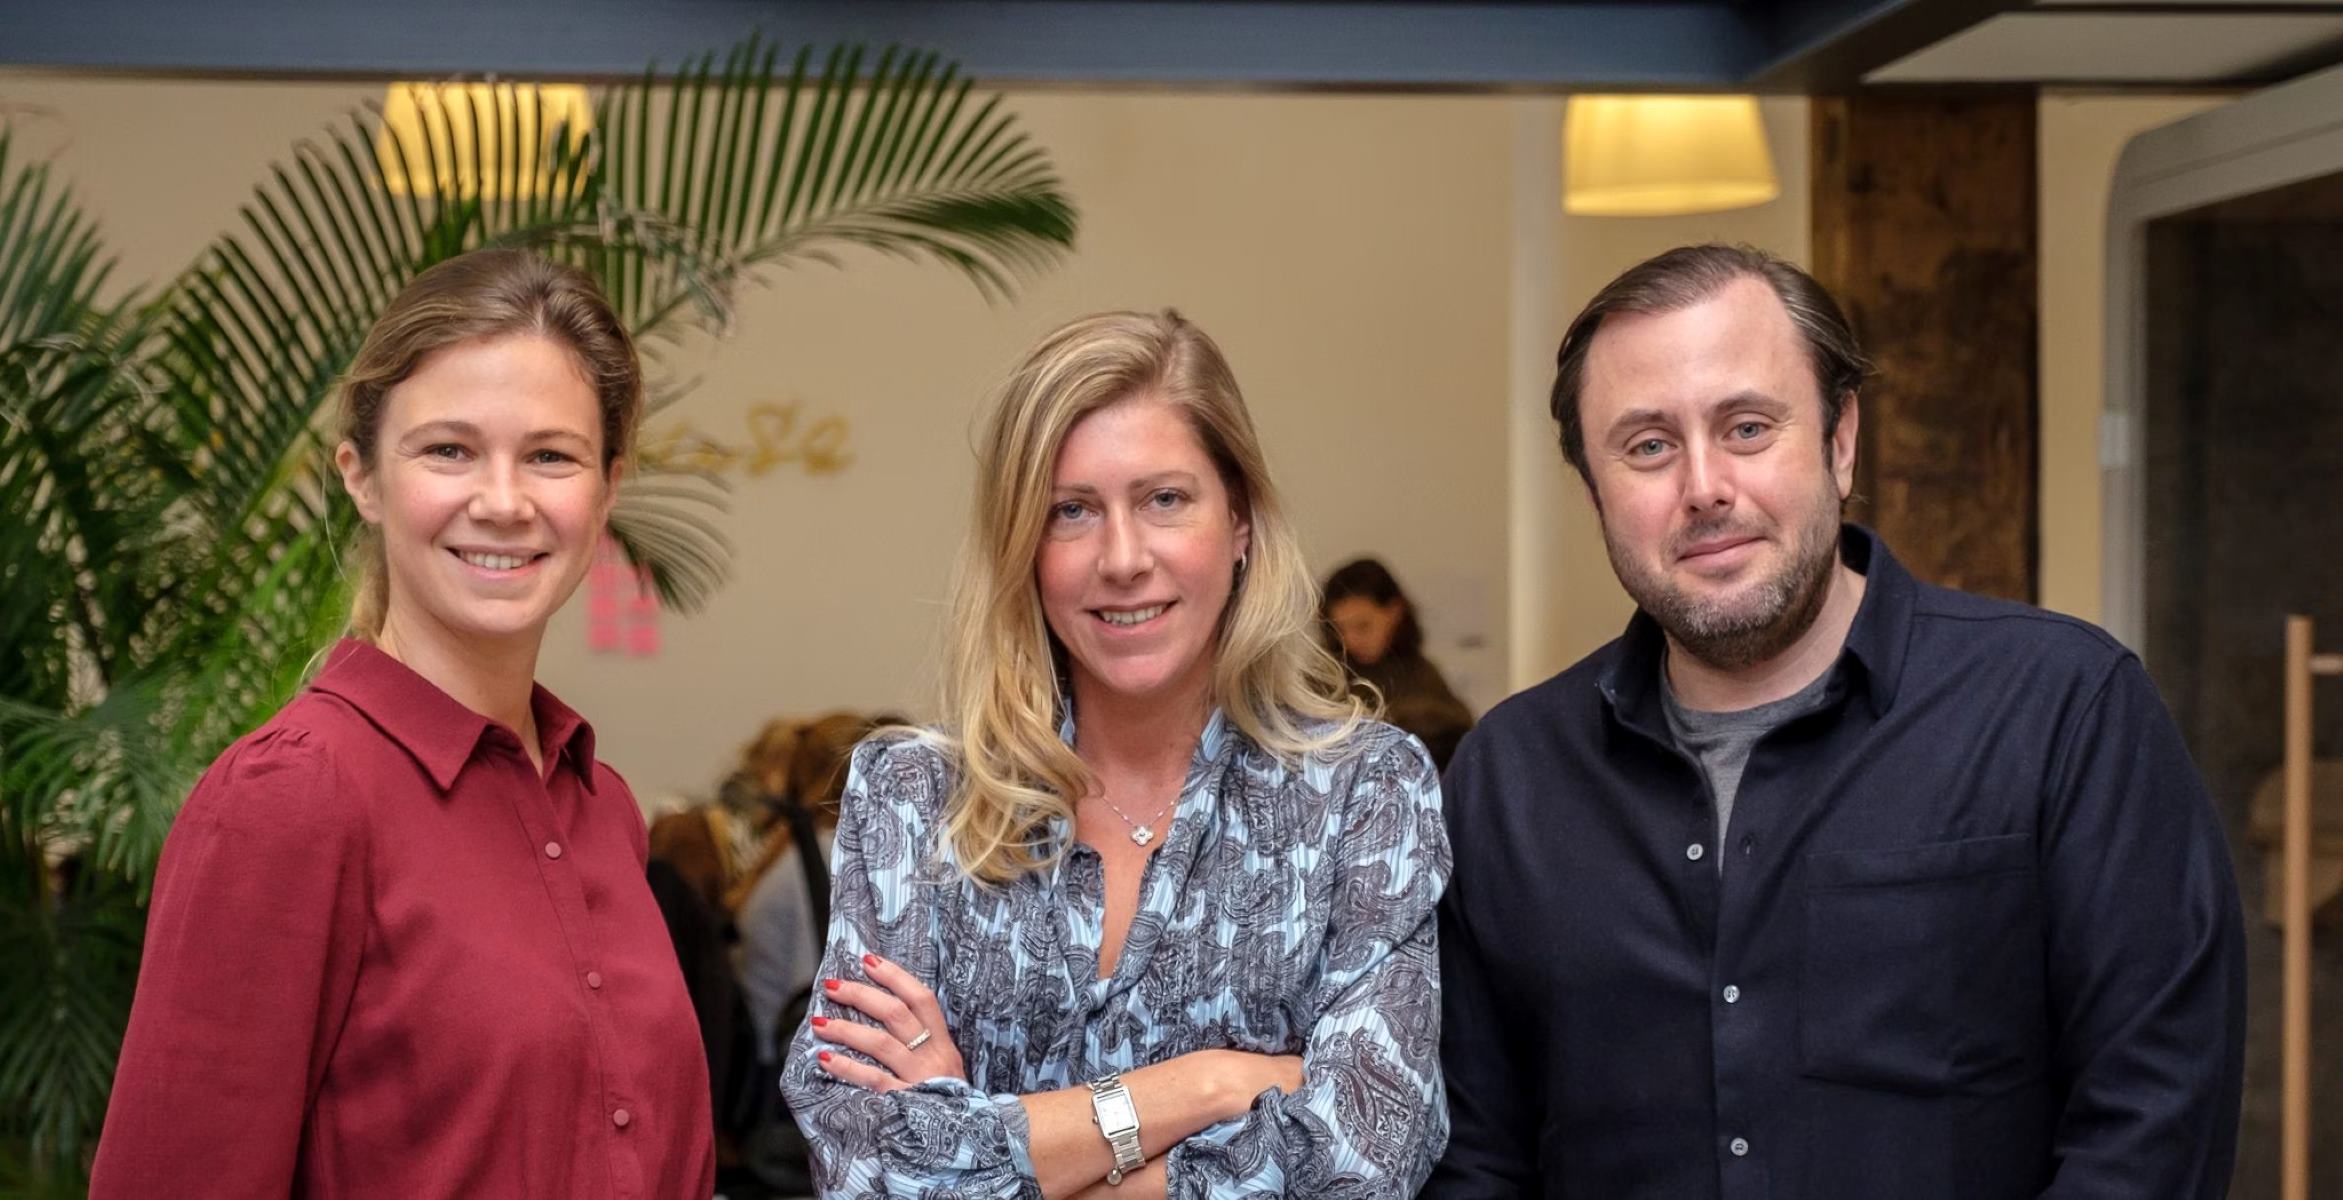 French VC Firm Founders Future Raises $80 Million In First Close For New Funds